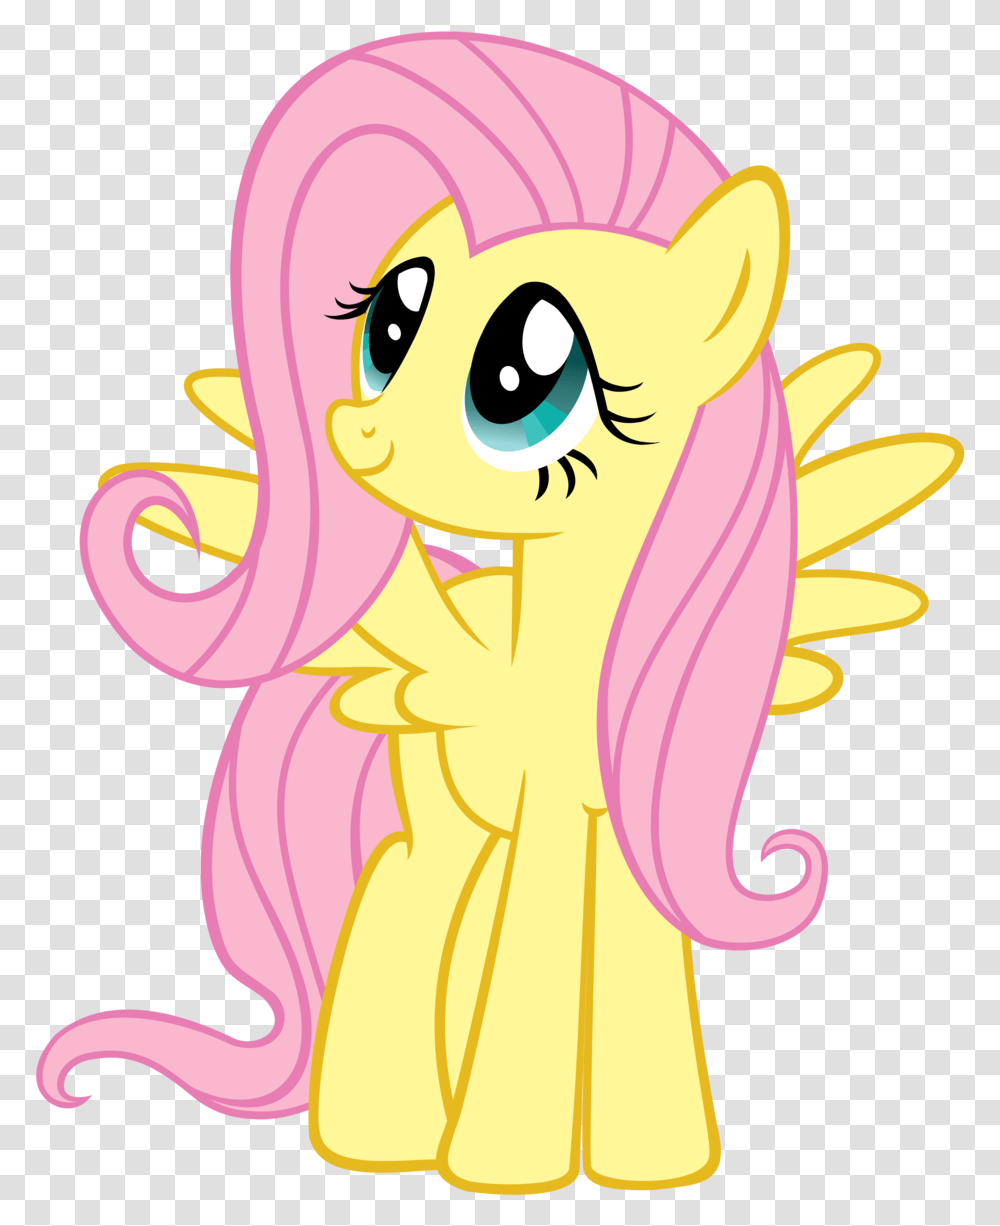 Twilight Sparkleamp Fluttershy My Little Pony Characters, Apparel Transparent Png